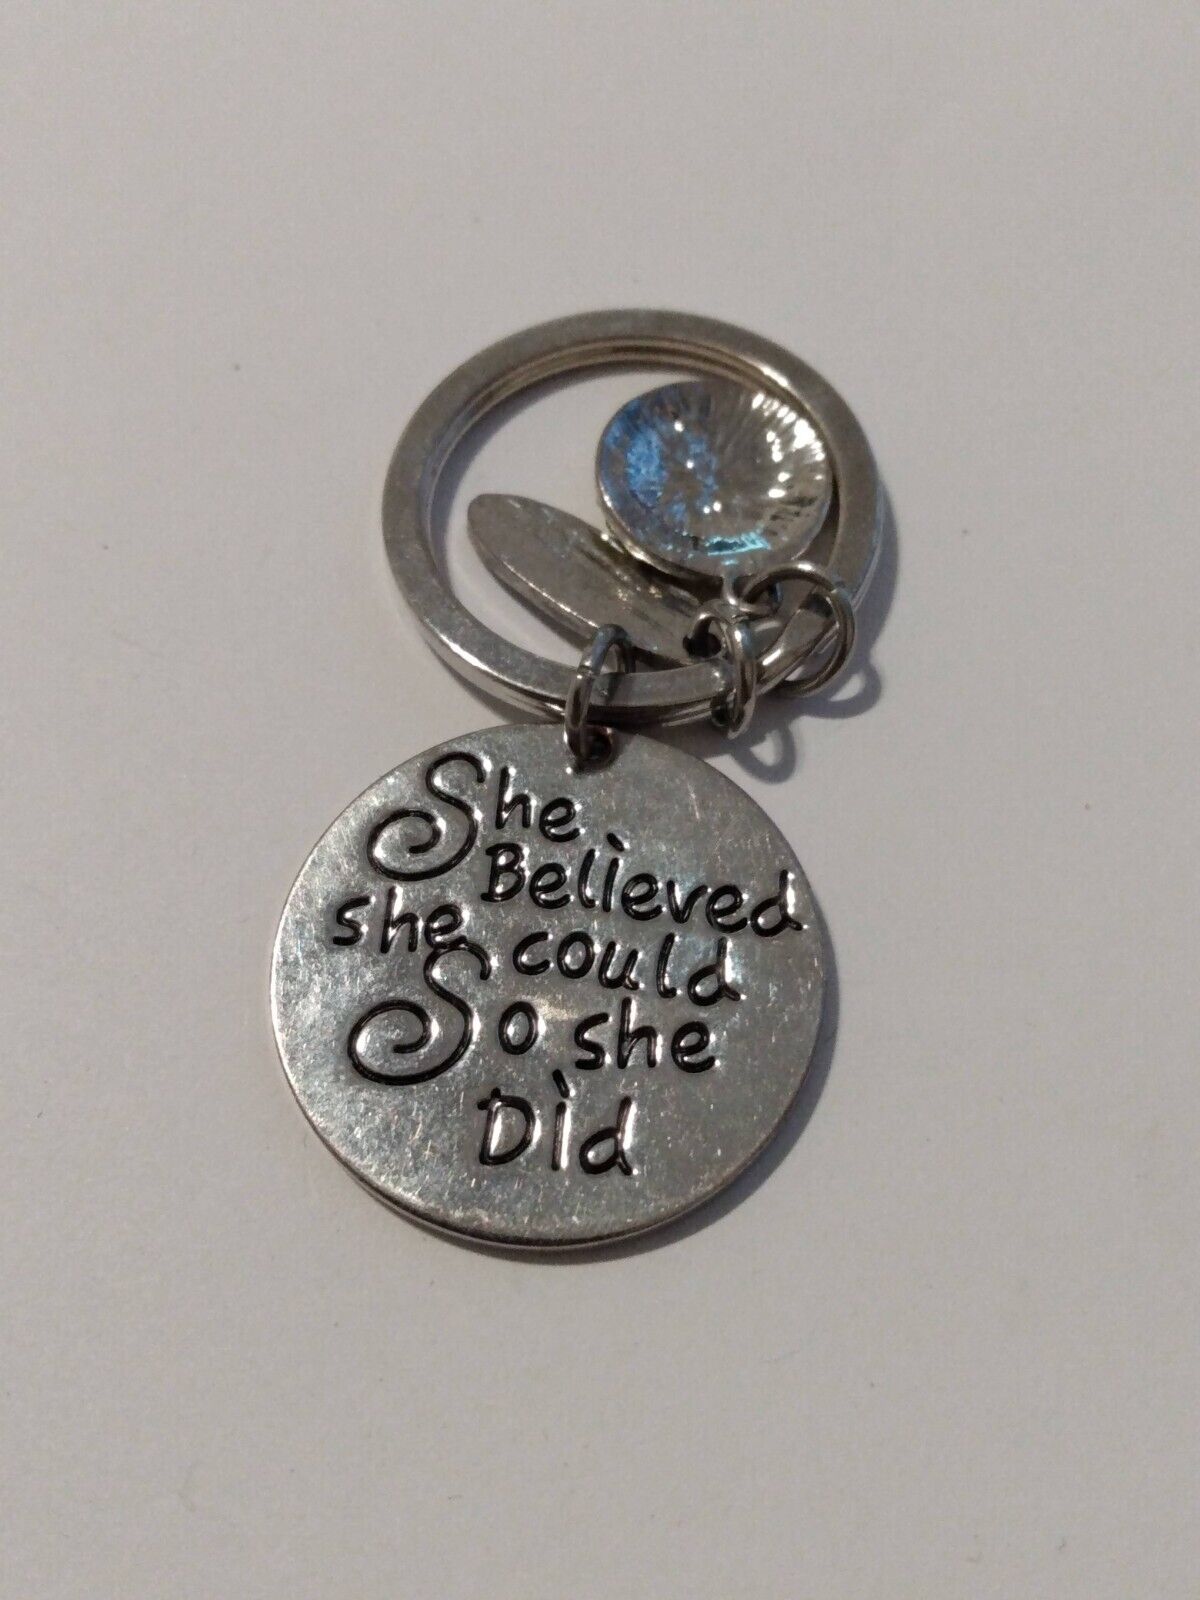 She Believed She Could So She Did I+ Softball nspirational Keychain Charms